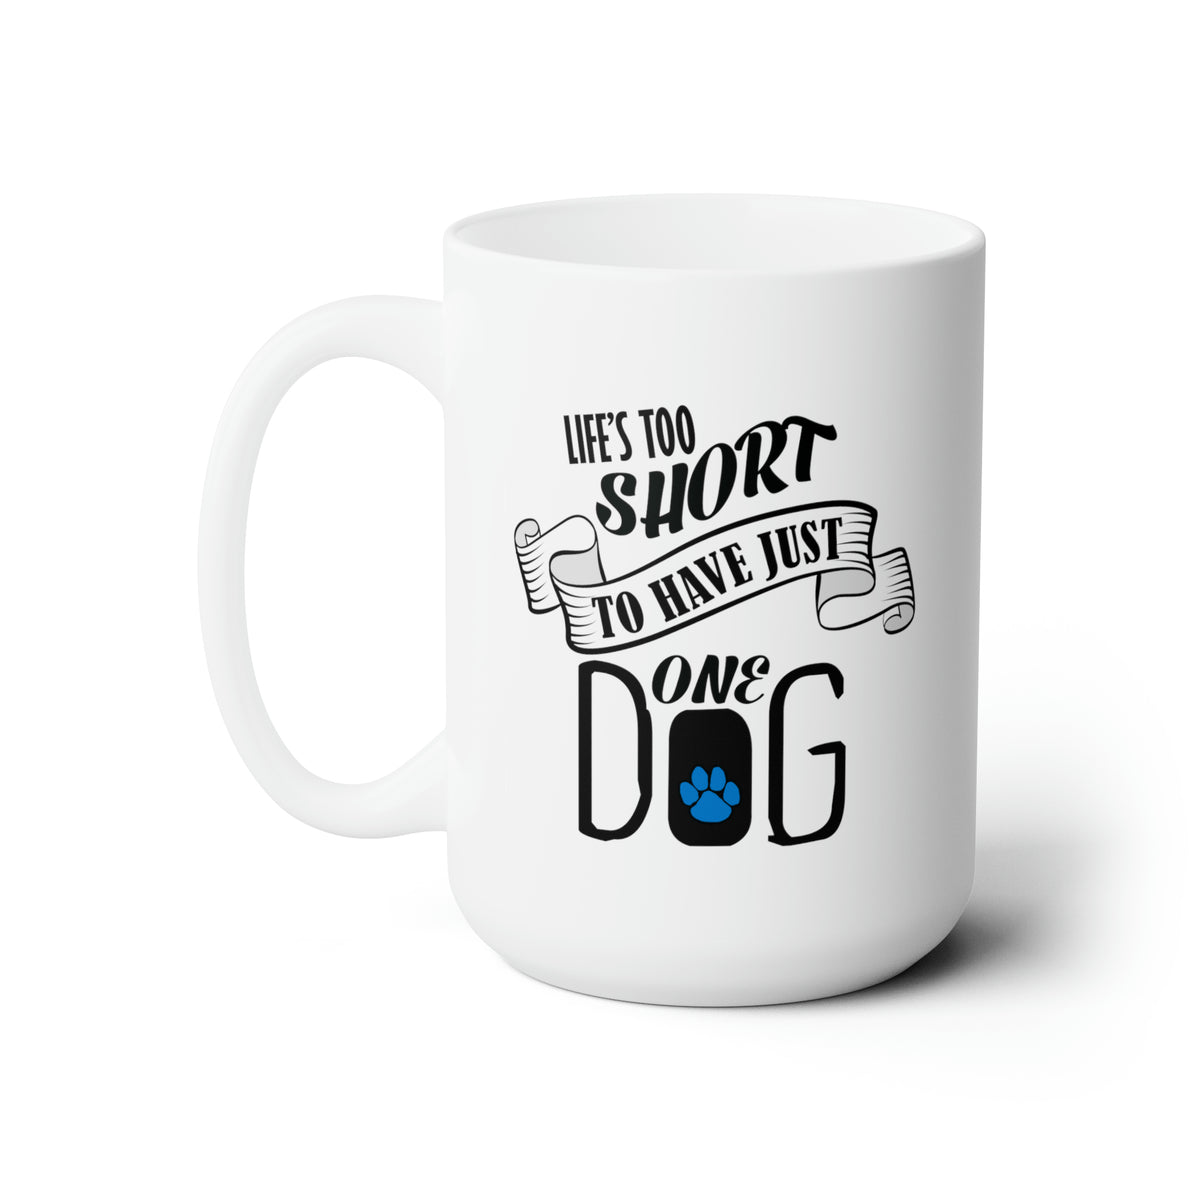 Life's Too Short To Have Just One Dog - True words on a 15 oz. Mug.